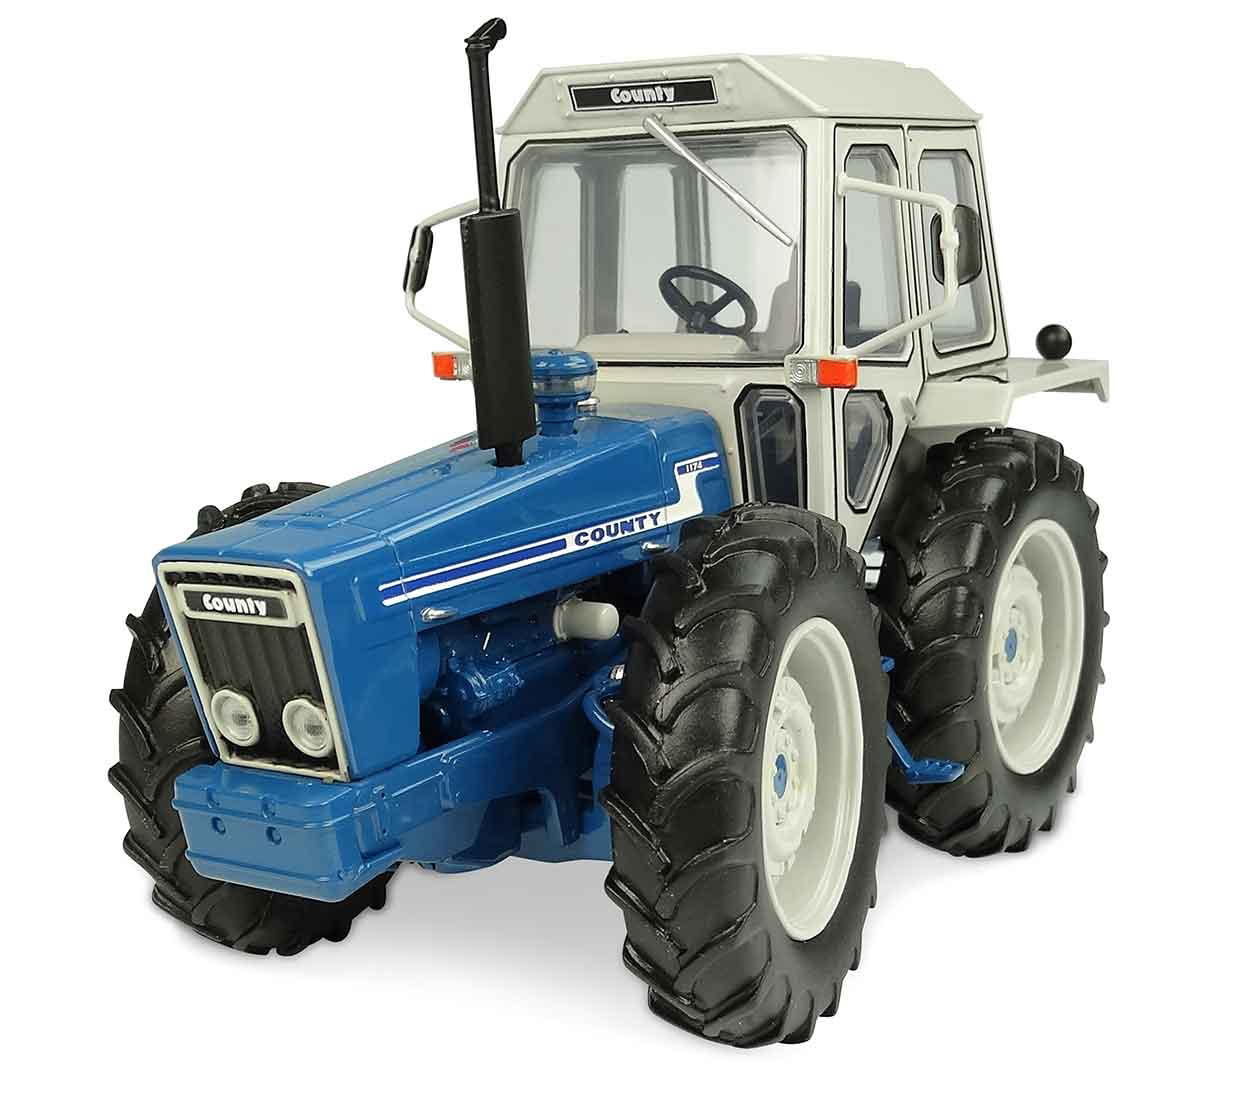 Ford County 1174 Tractor 1/32 Diecast Model by Universal Hobbies